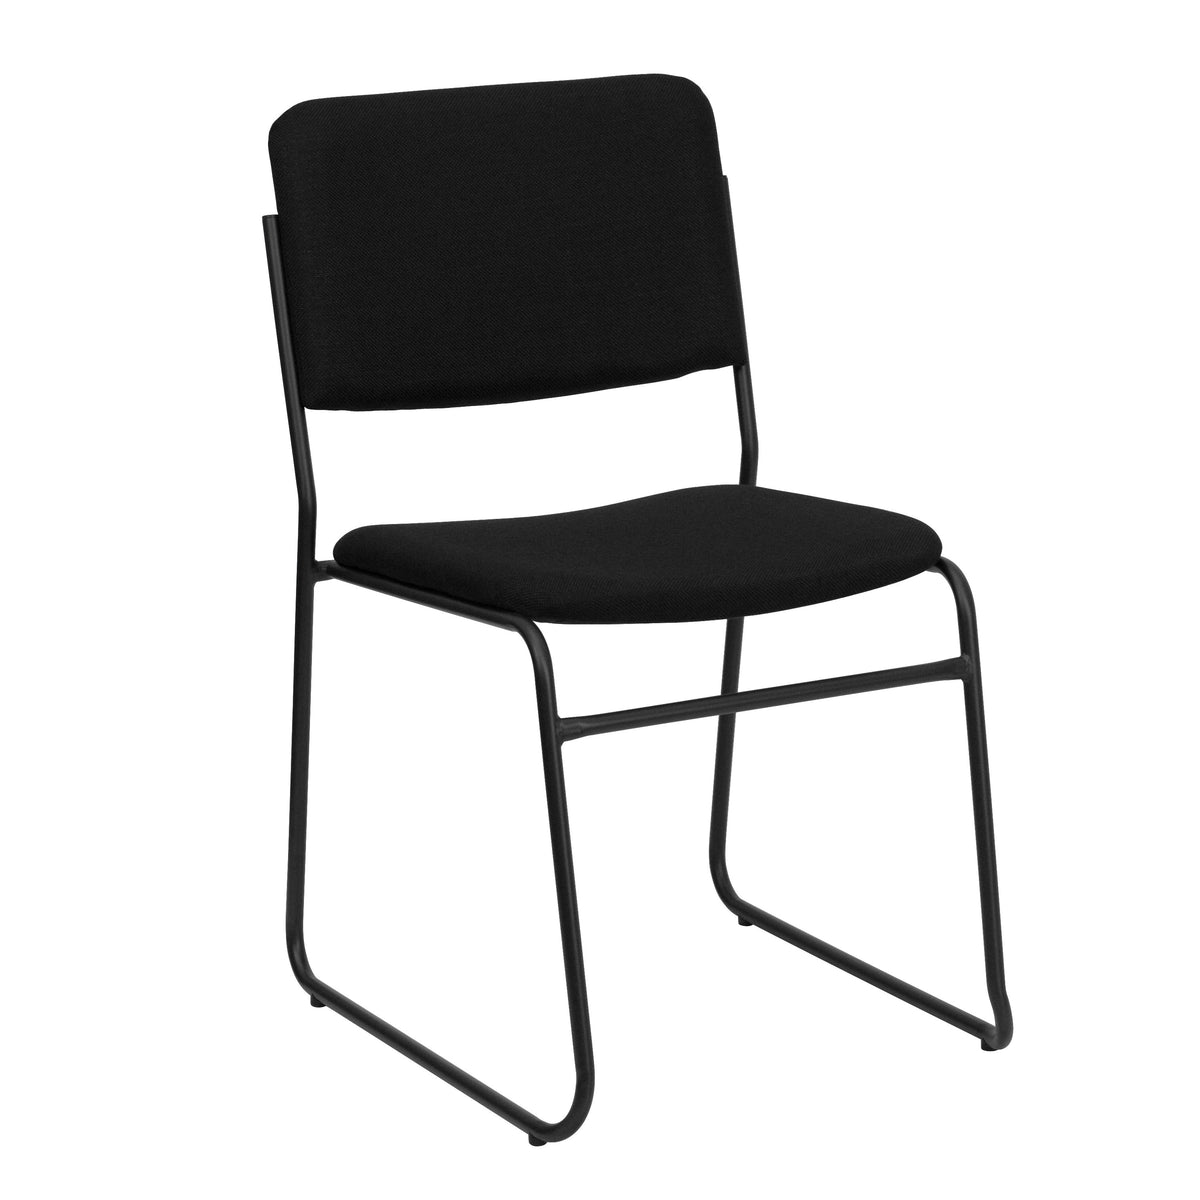 Black Fabric/Black Frame |#| 500 lb. Capacity High Density Black Fabric Stacking Chair with Sled Base